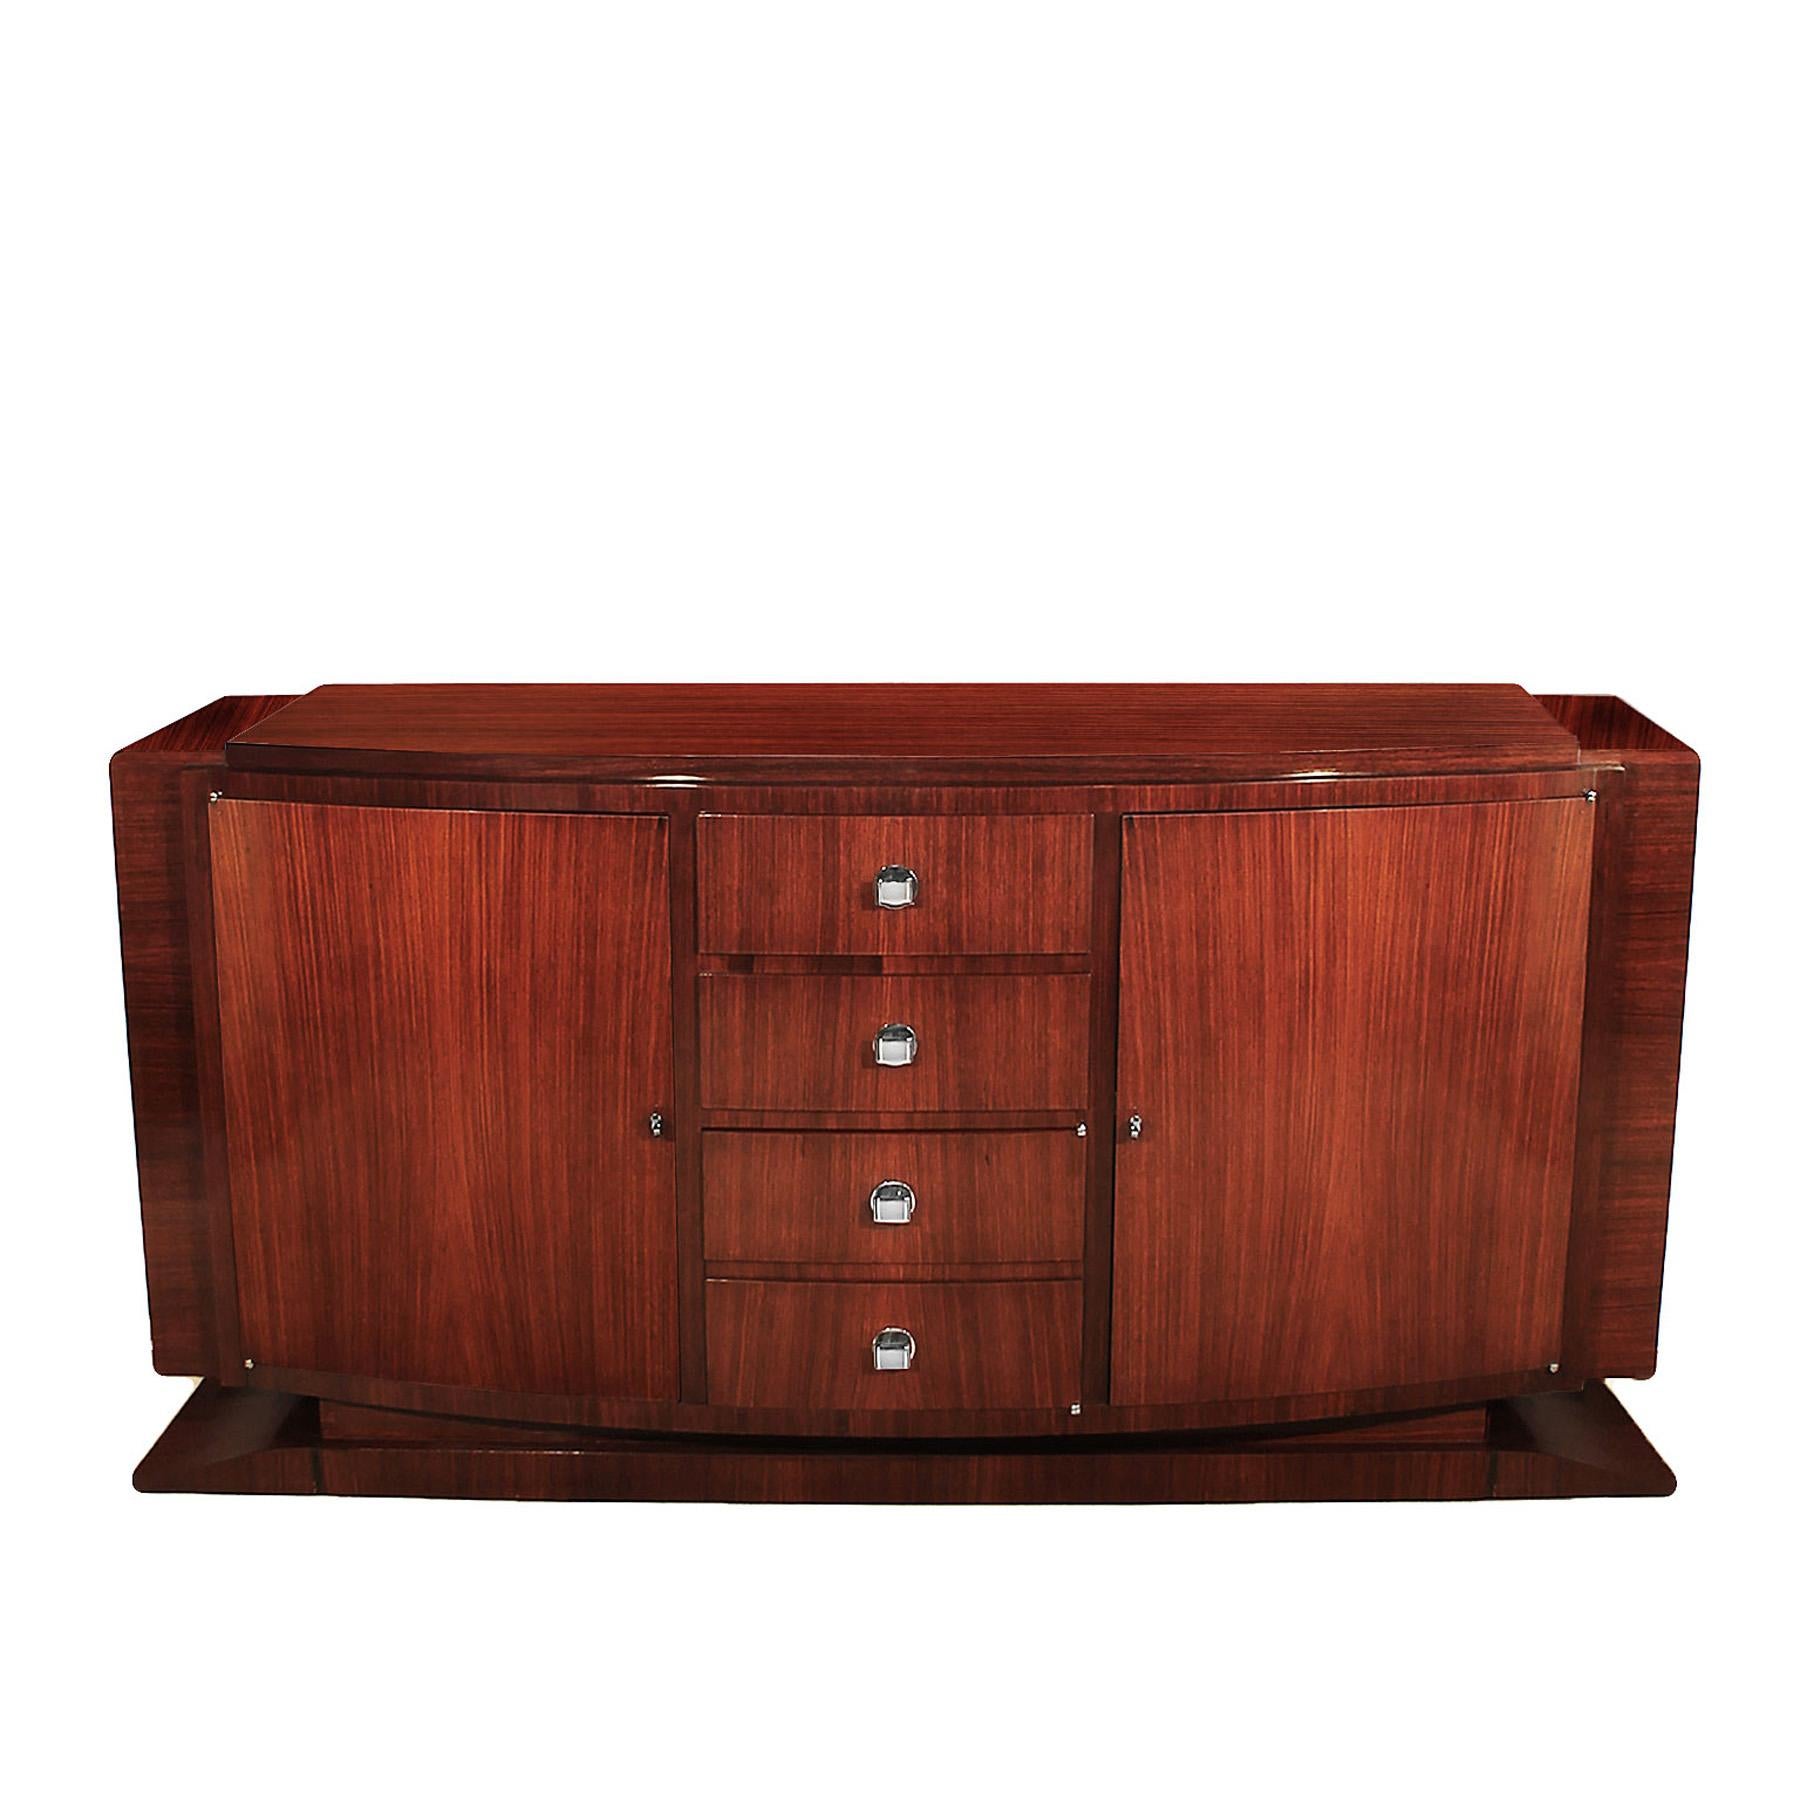 Veneer 1930´s Art Deco Sideboard In Mahogany and Bronze - France For Sale